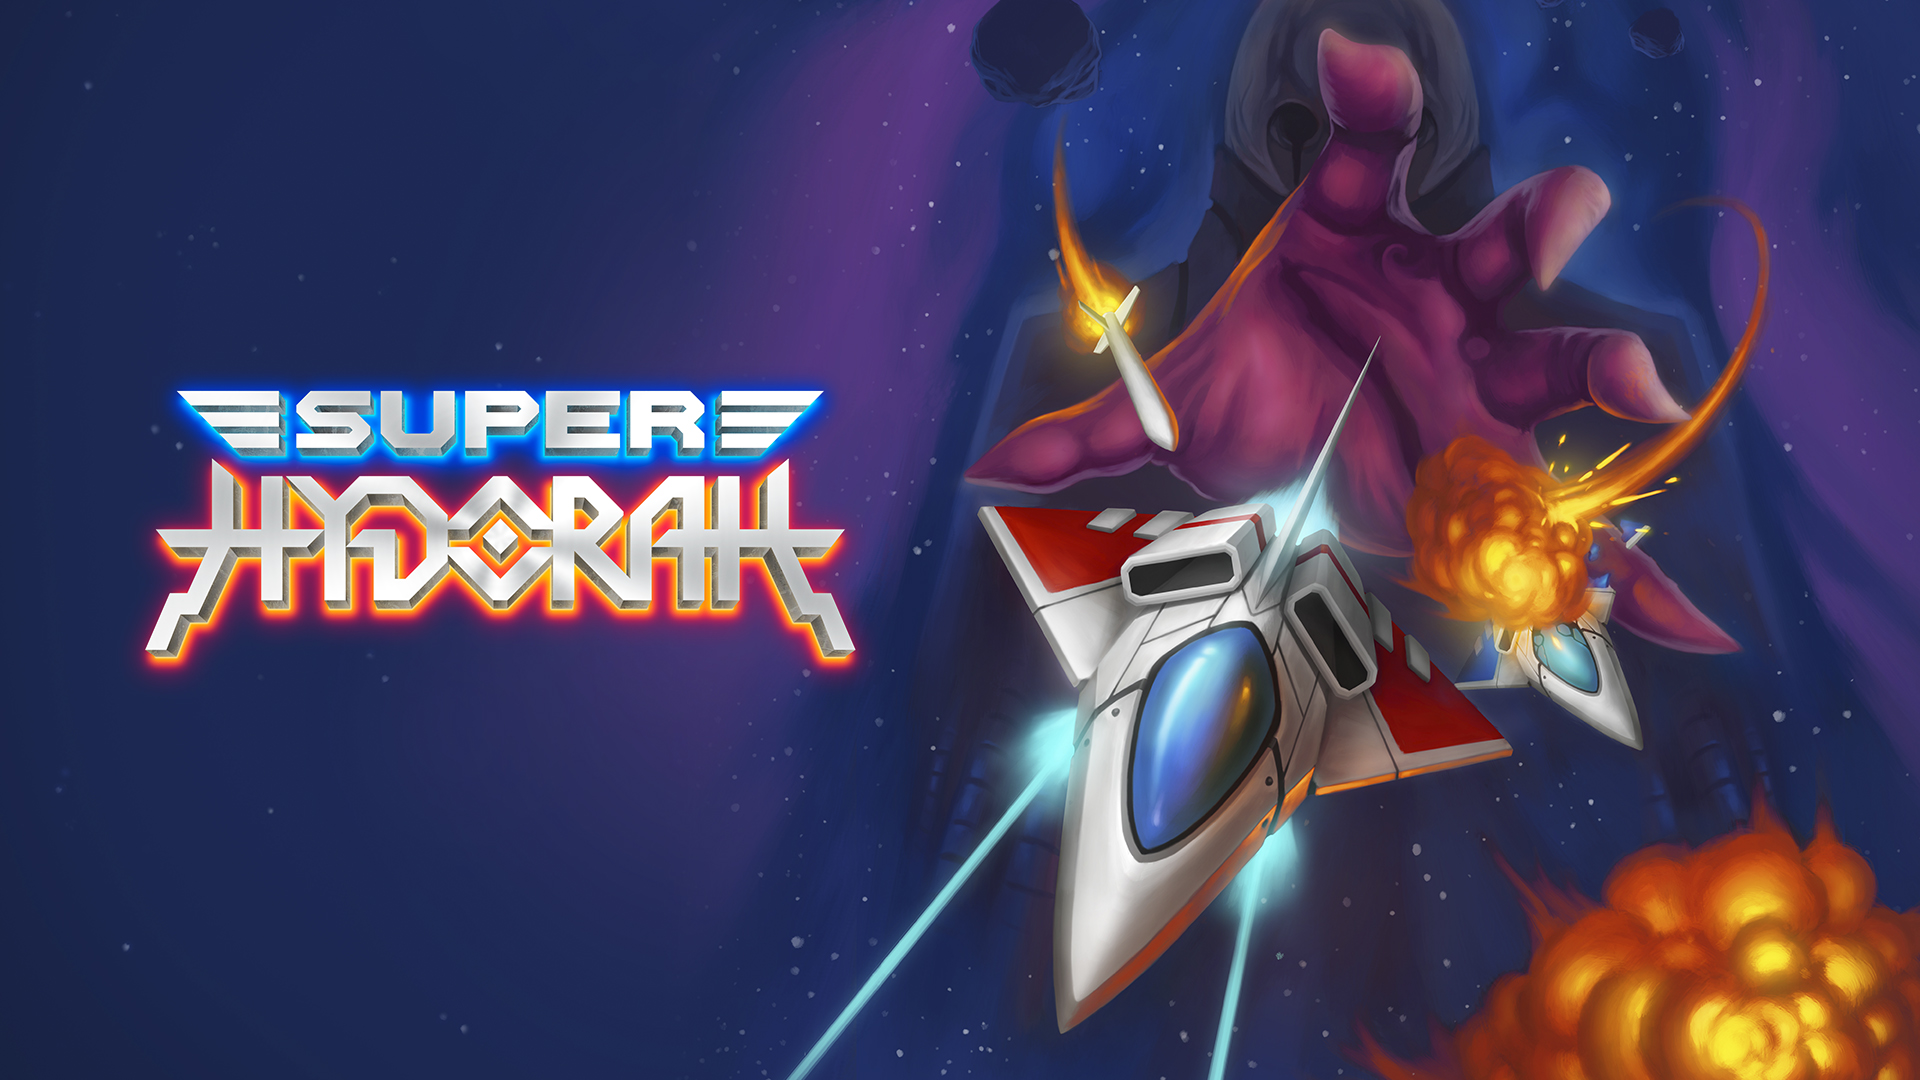 Super Hydorah gets a physical release on Switch